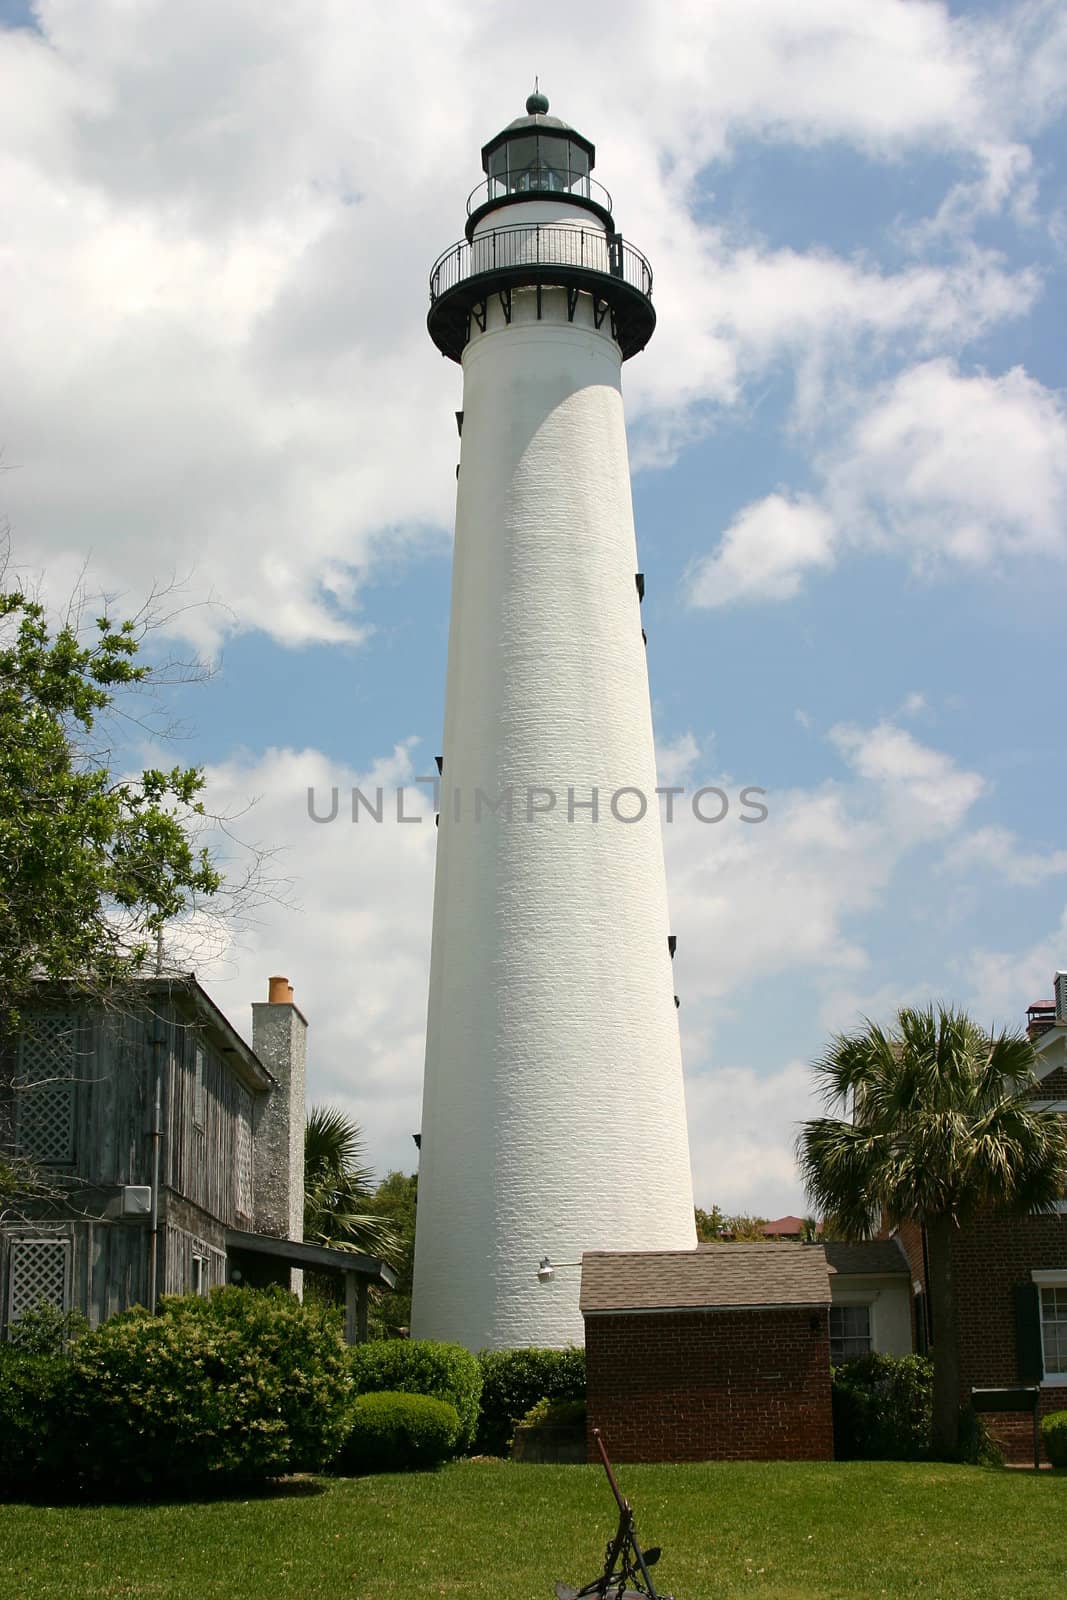 St. Simons Island Lighthouse by dtouch1